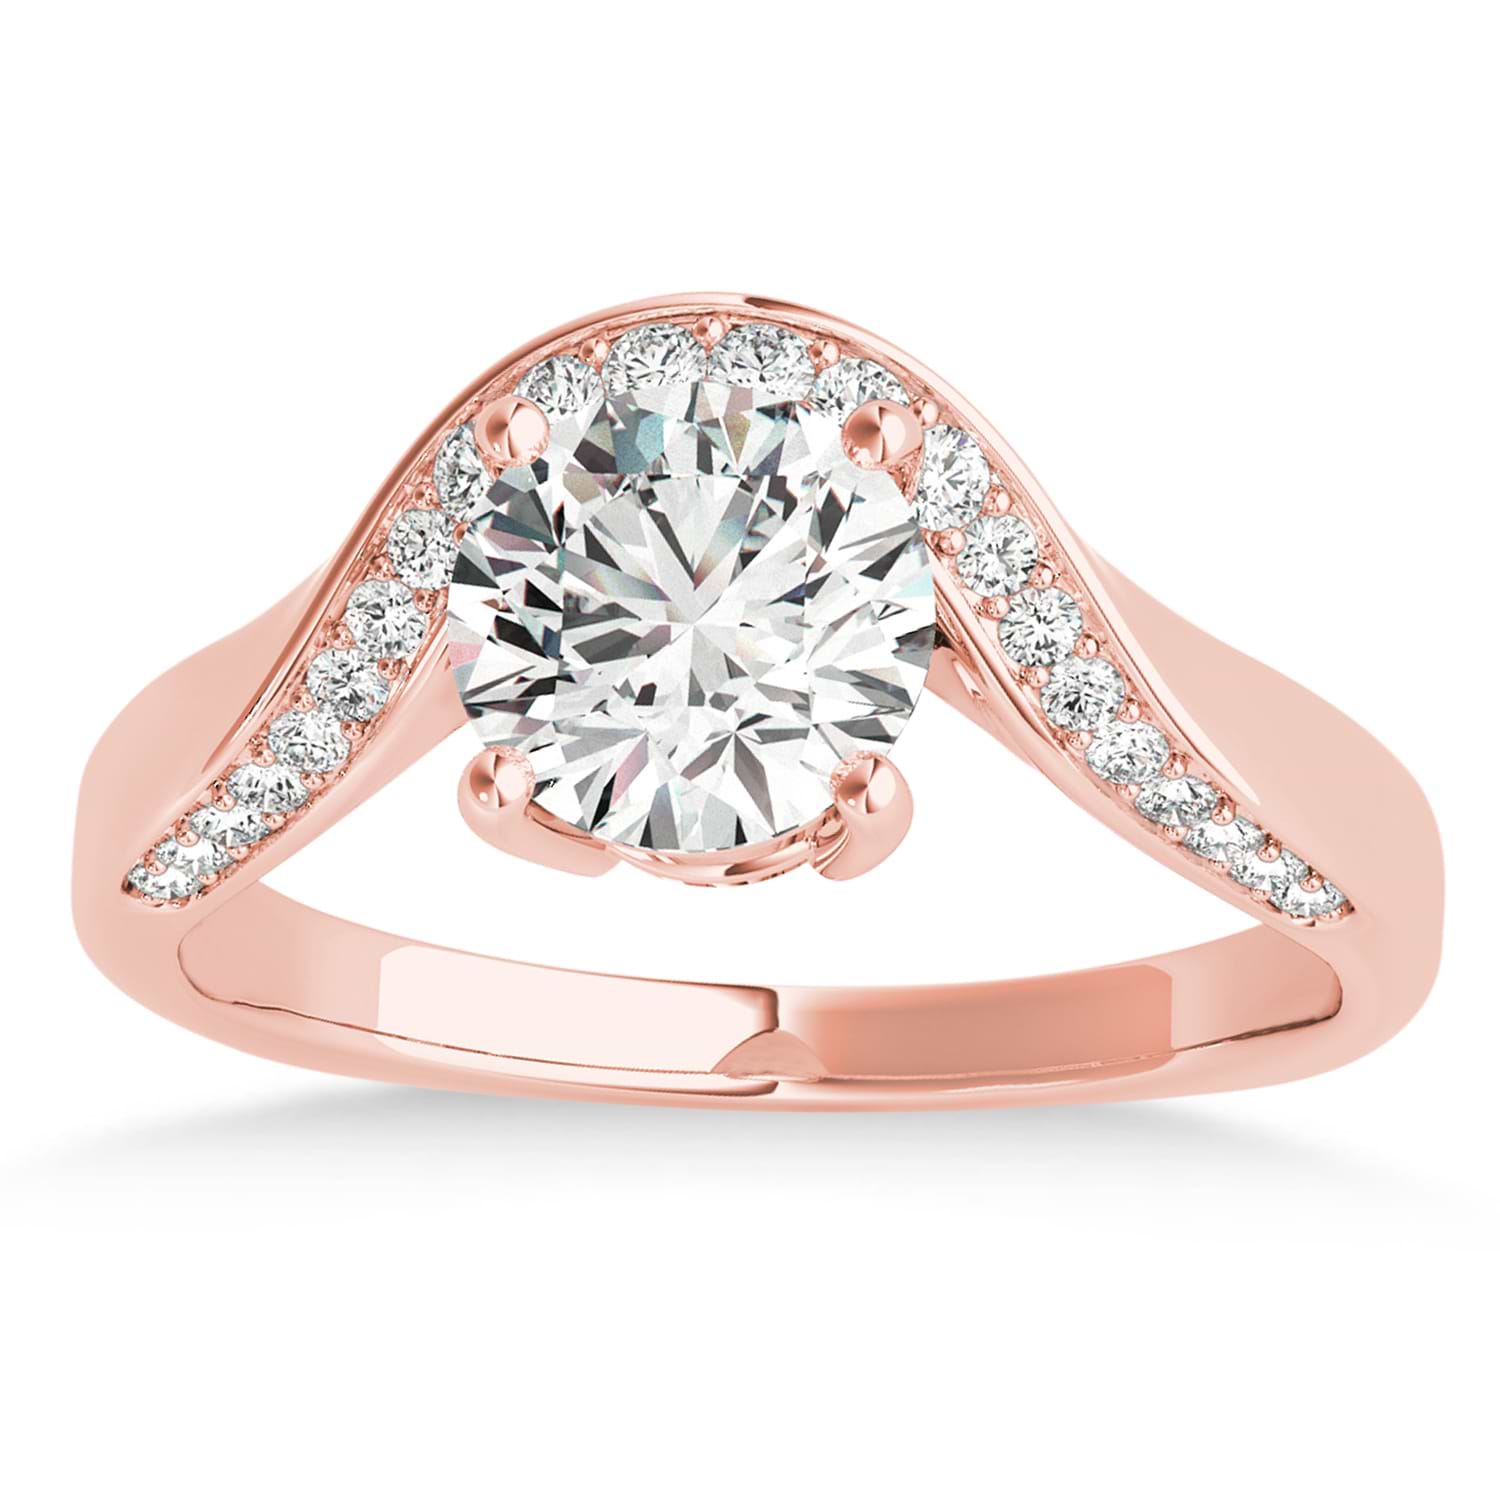 Diamond Euro Shank Curved Engagement Ring in 18k Rose Gold (0.16ct)